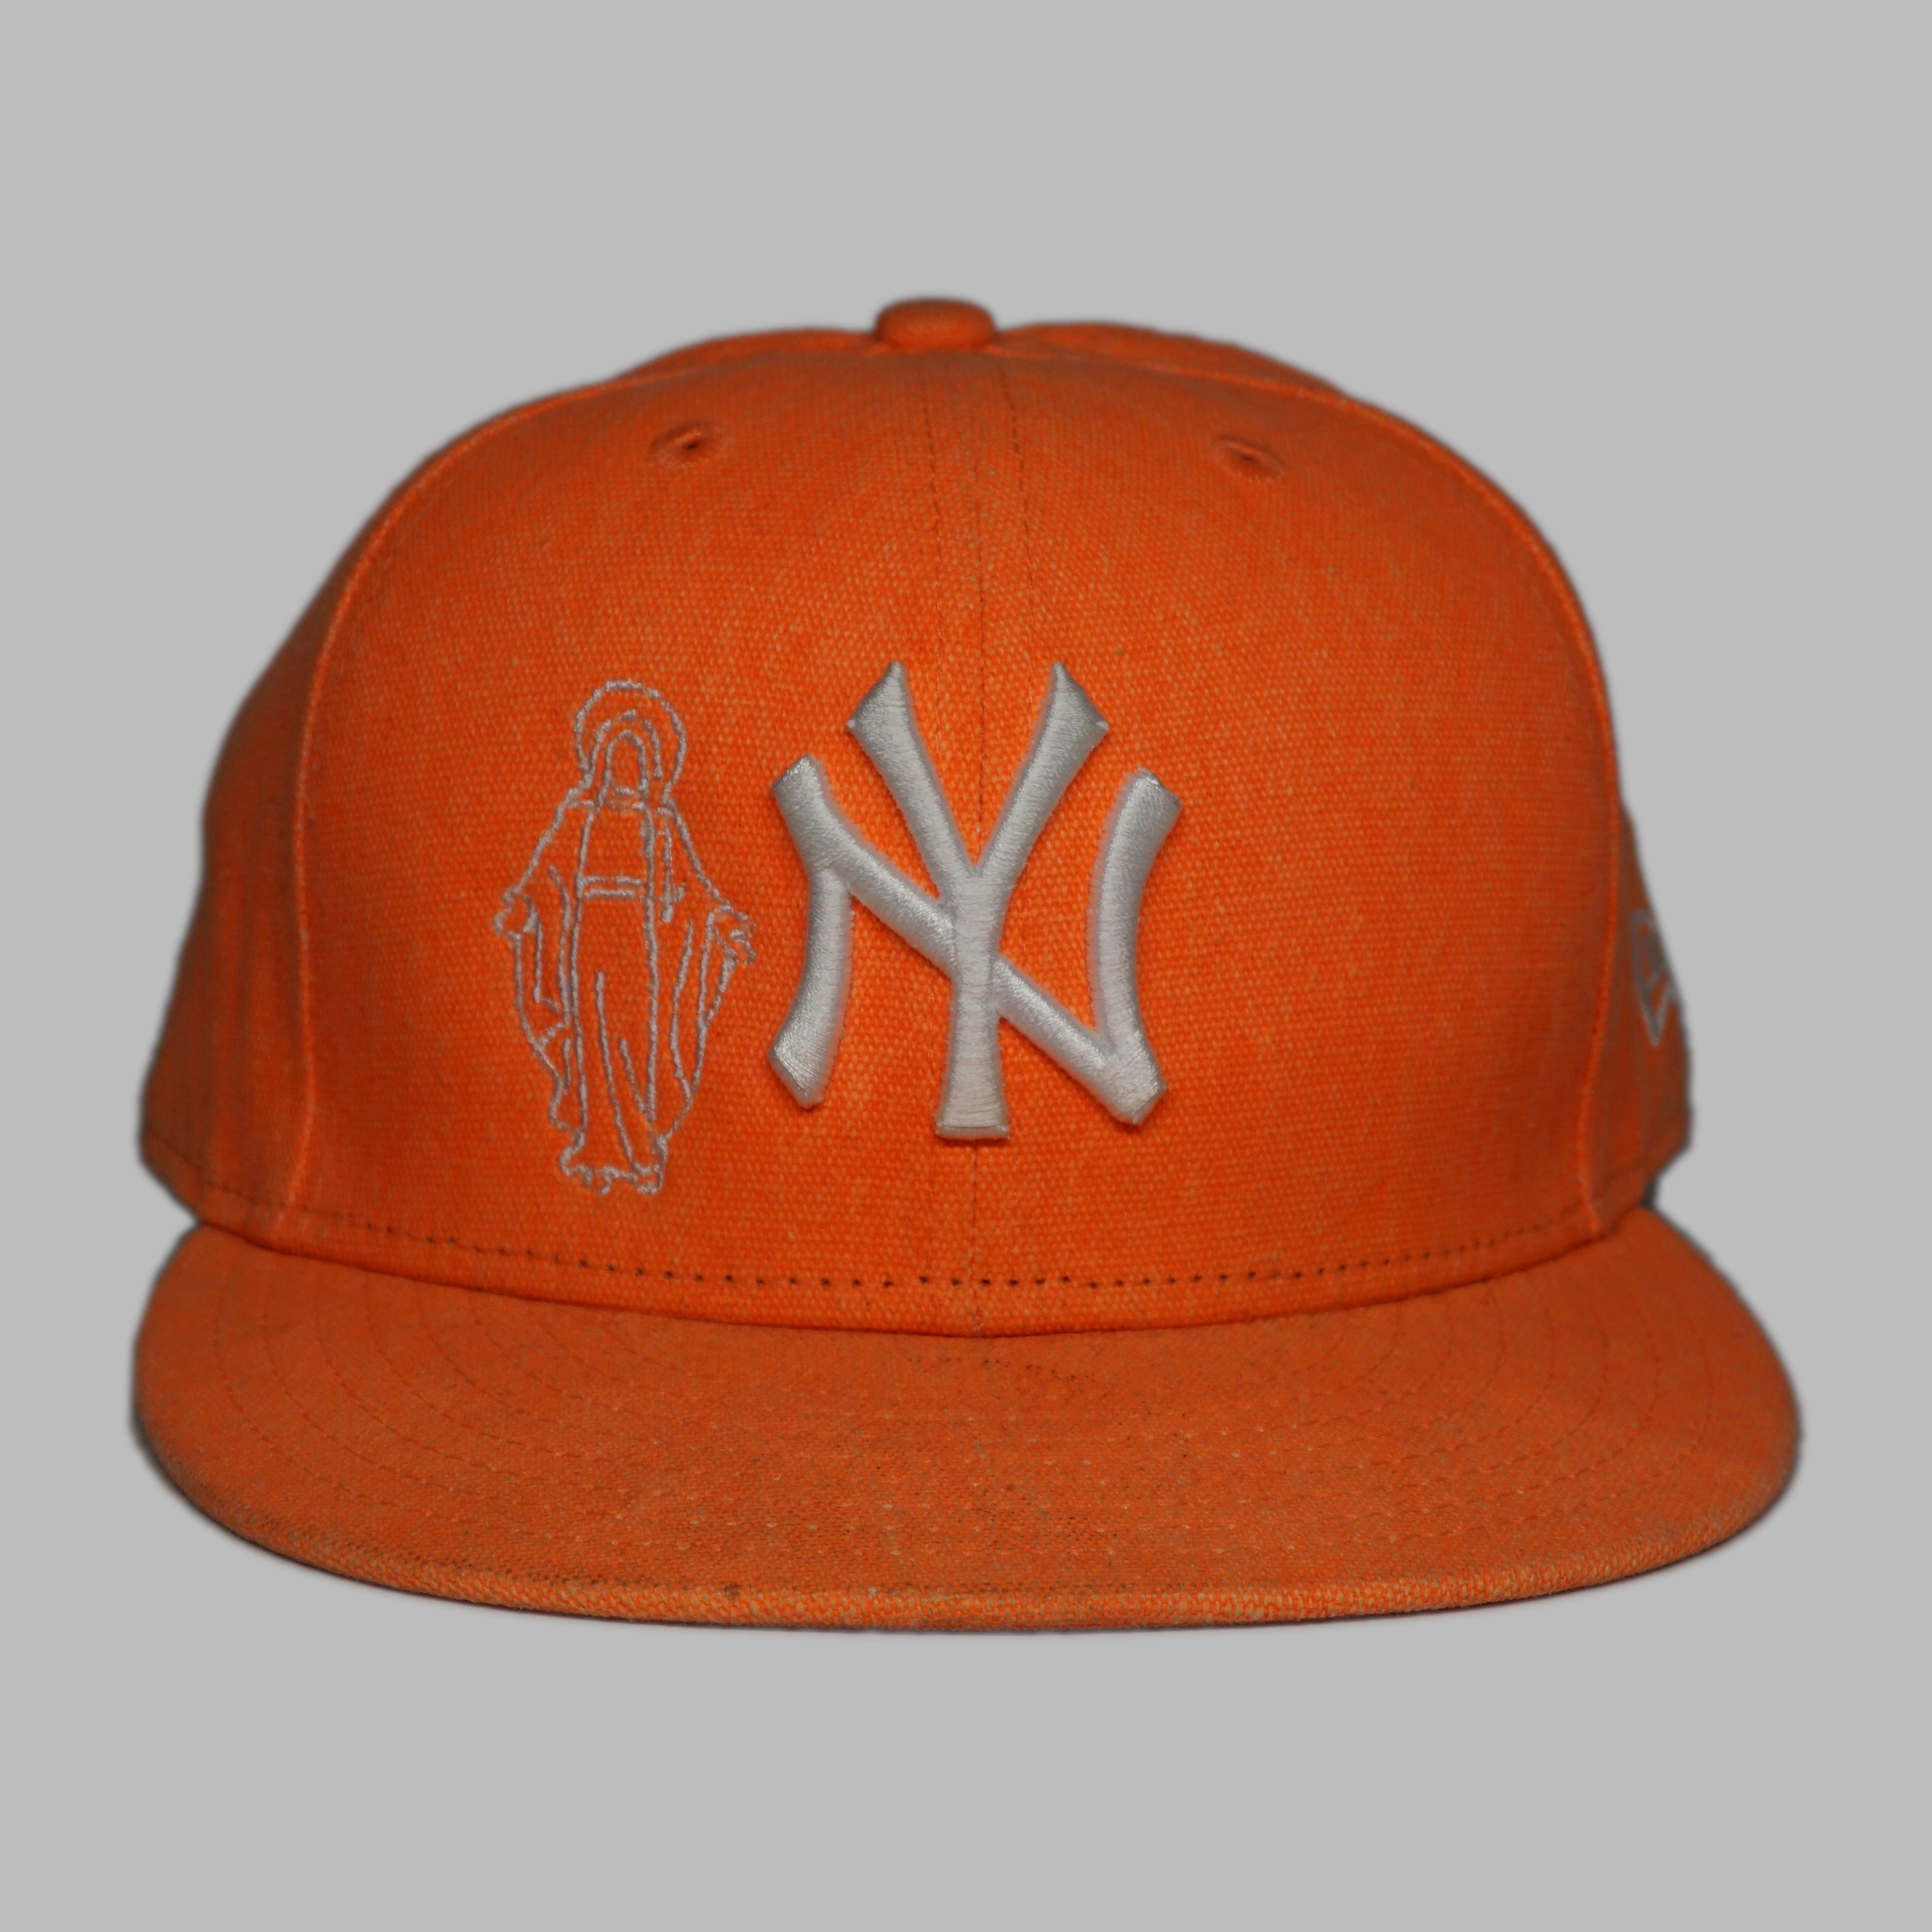 ORANGE HOLY FITTED (size 7 1/2)